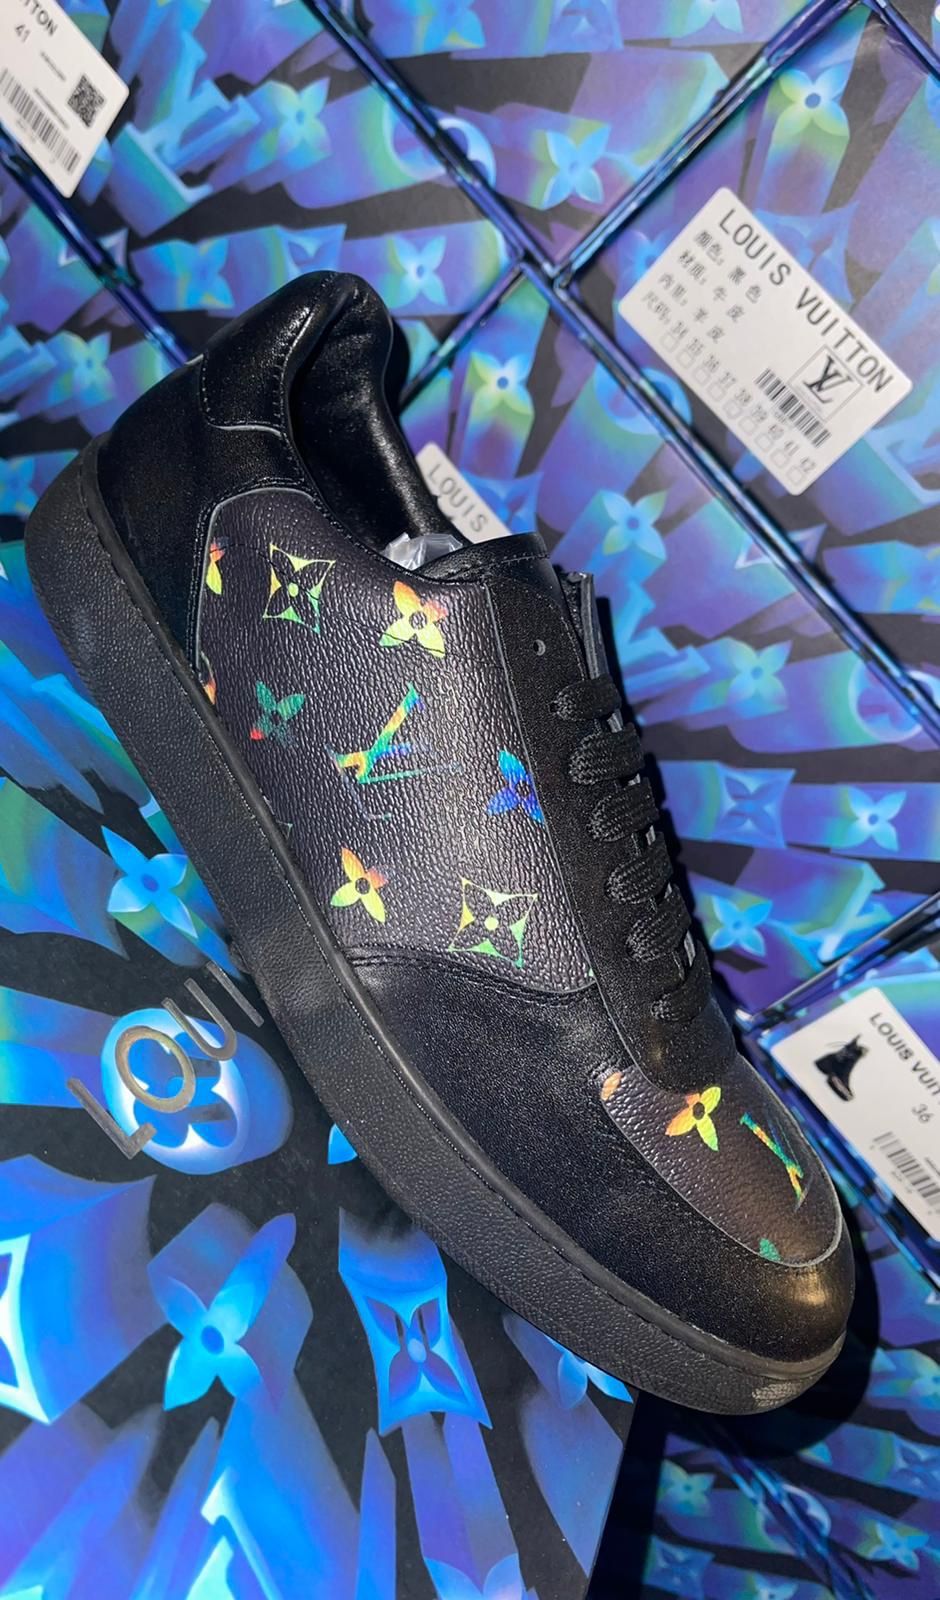 New Louis Vuitton Trainer #54 Graphic Print Blue/White Sneakers (Euro 44/ Men's 10-11) for Sale in Valley Stream, NY - OfferUp